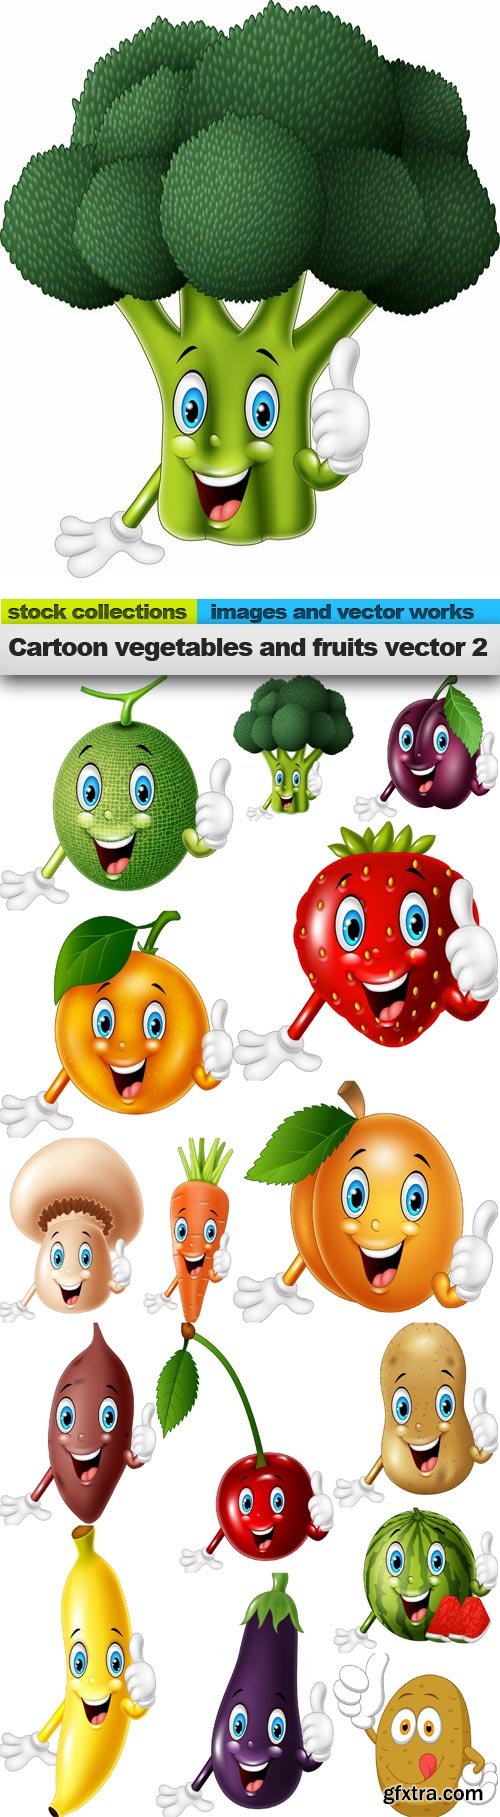 Cartoon vegetables and fruits vector 2, 15 x EPS